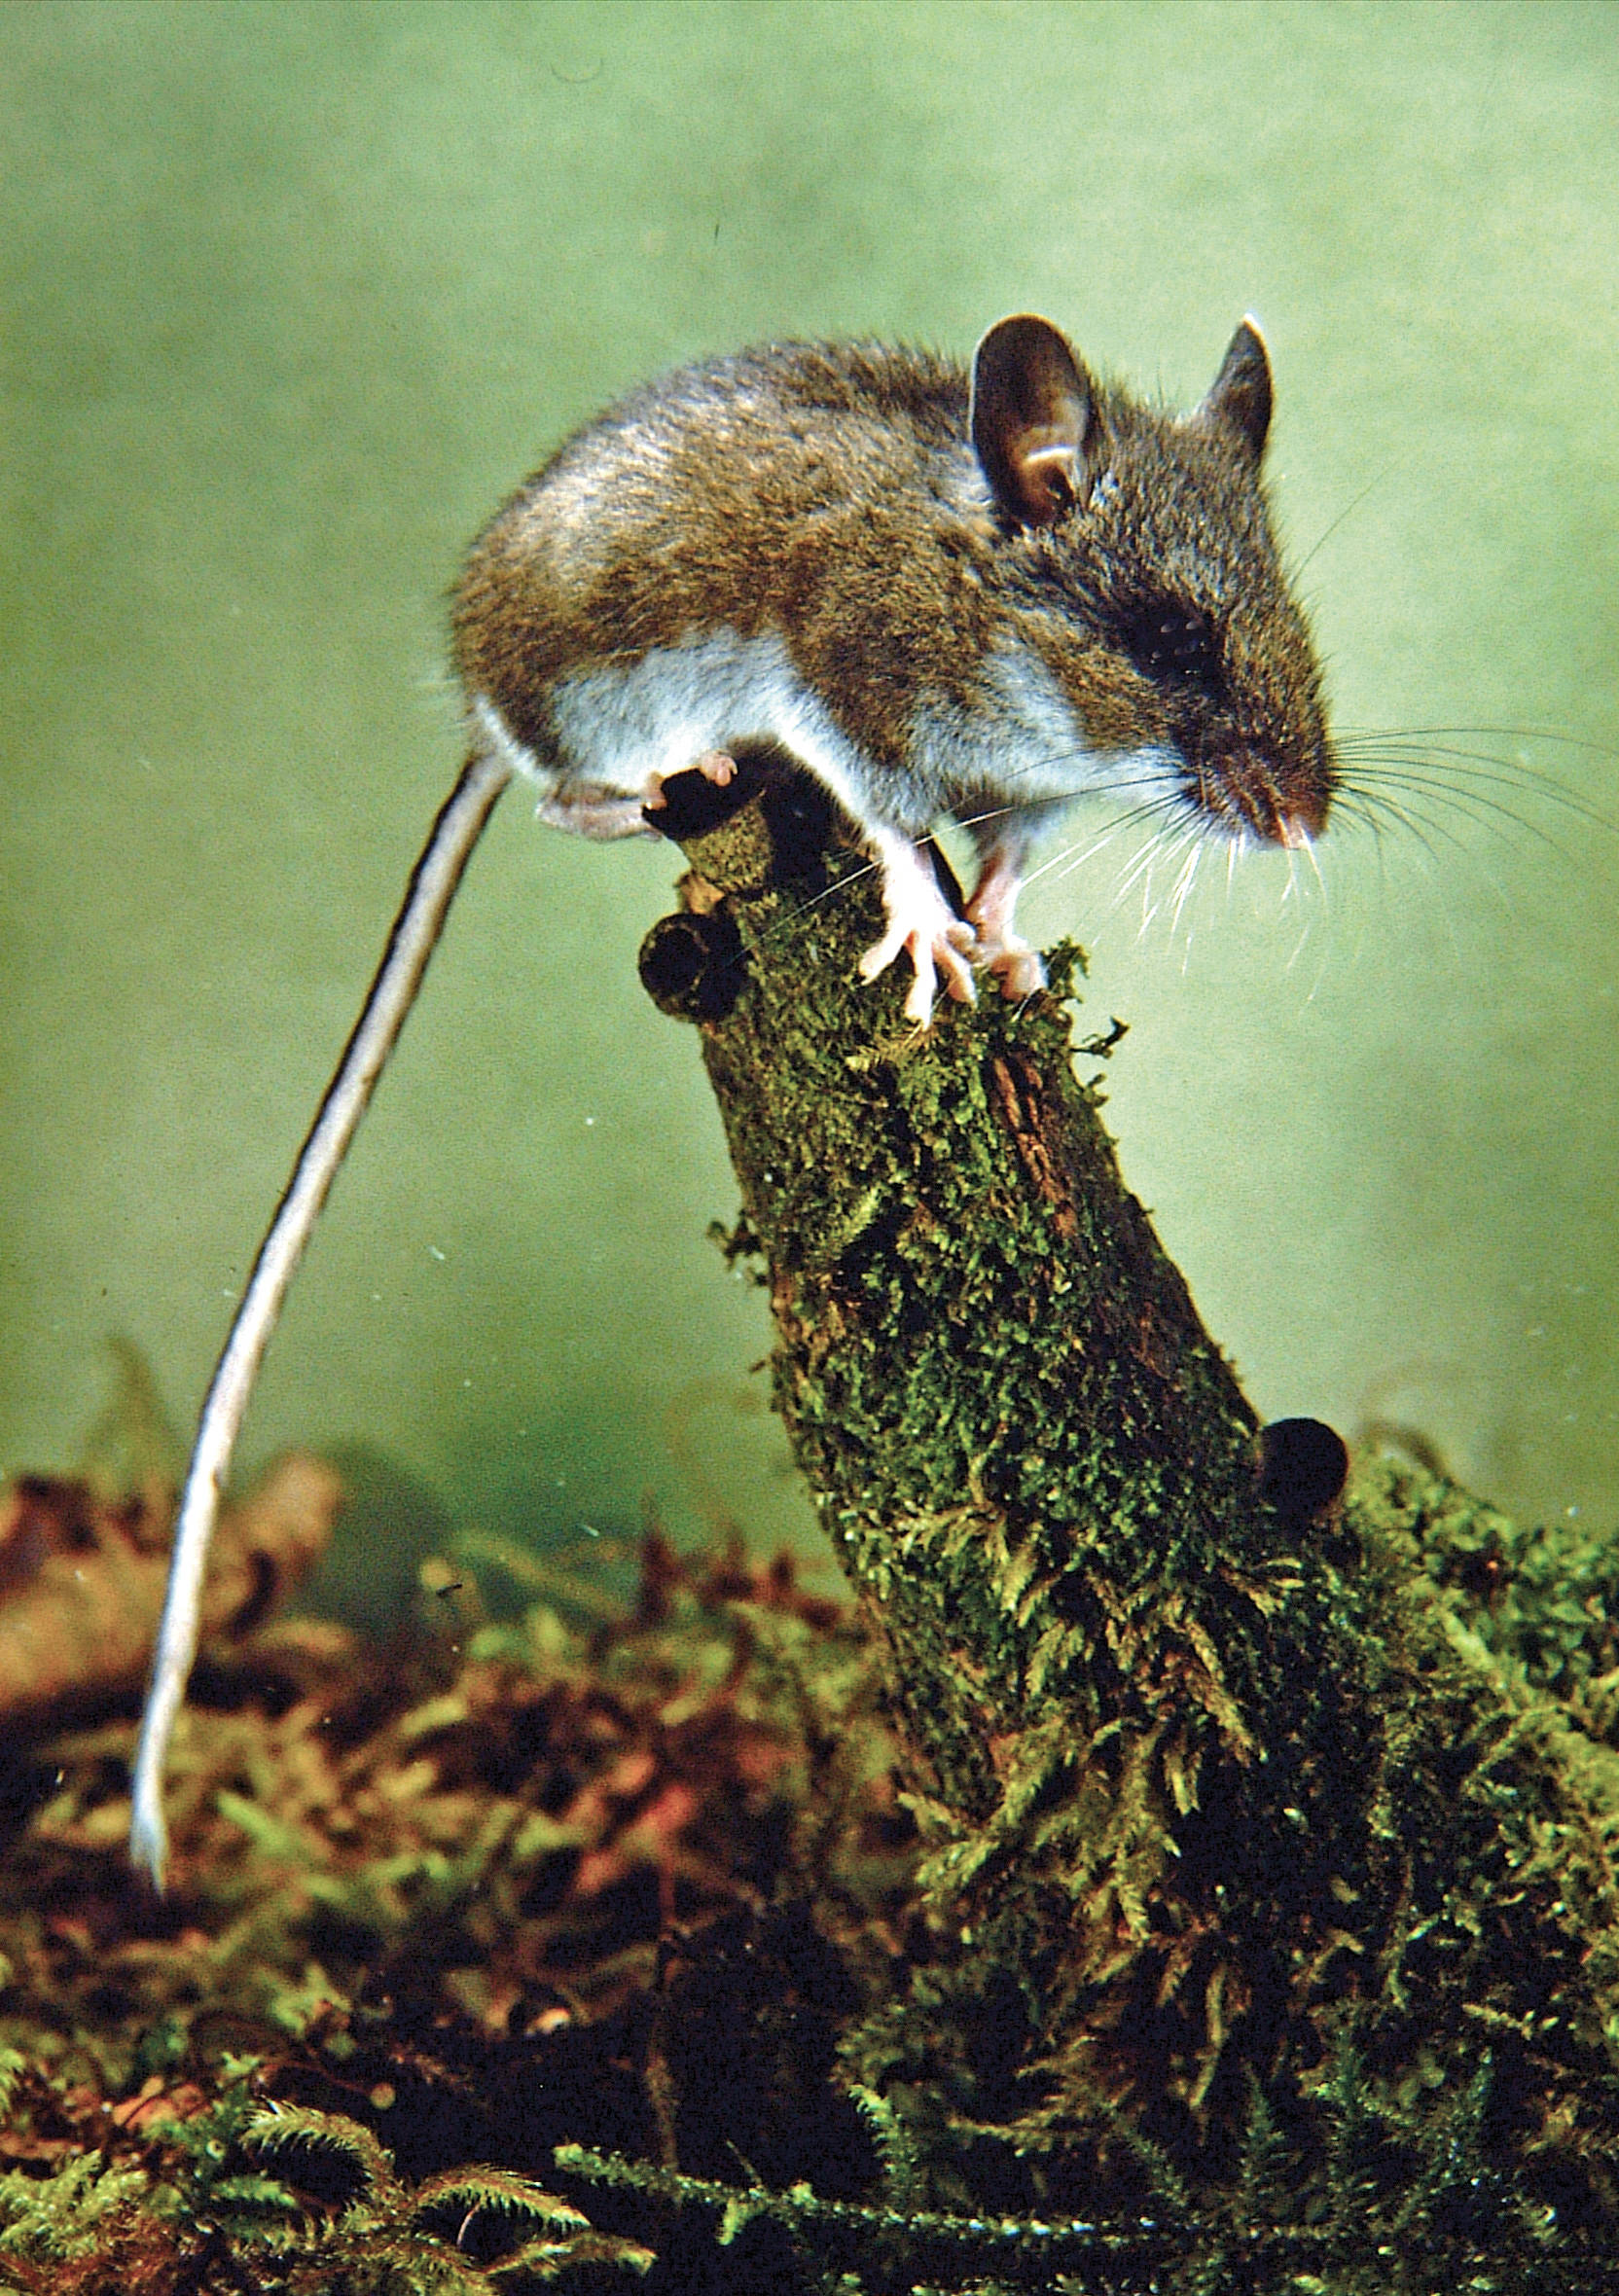 A deer mouse, with big ears and big eyes, has a long tail for balance when jumping on its long hind legs. (Courtesy Photo / Bob Armstrong)